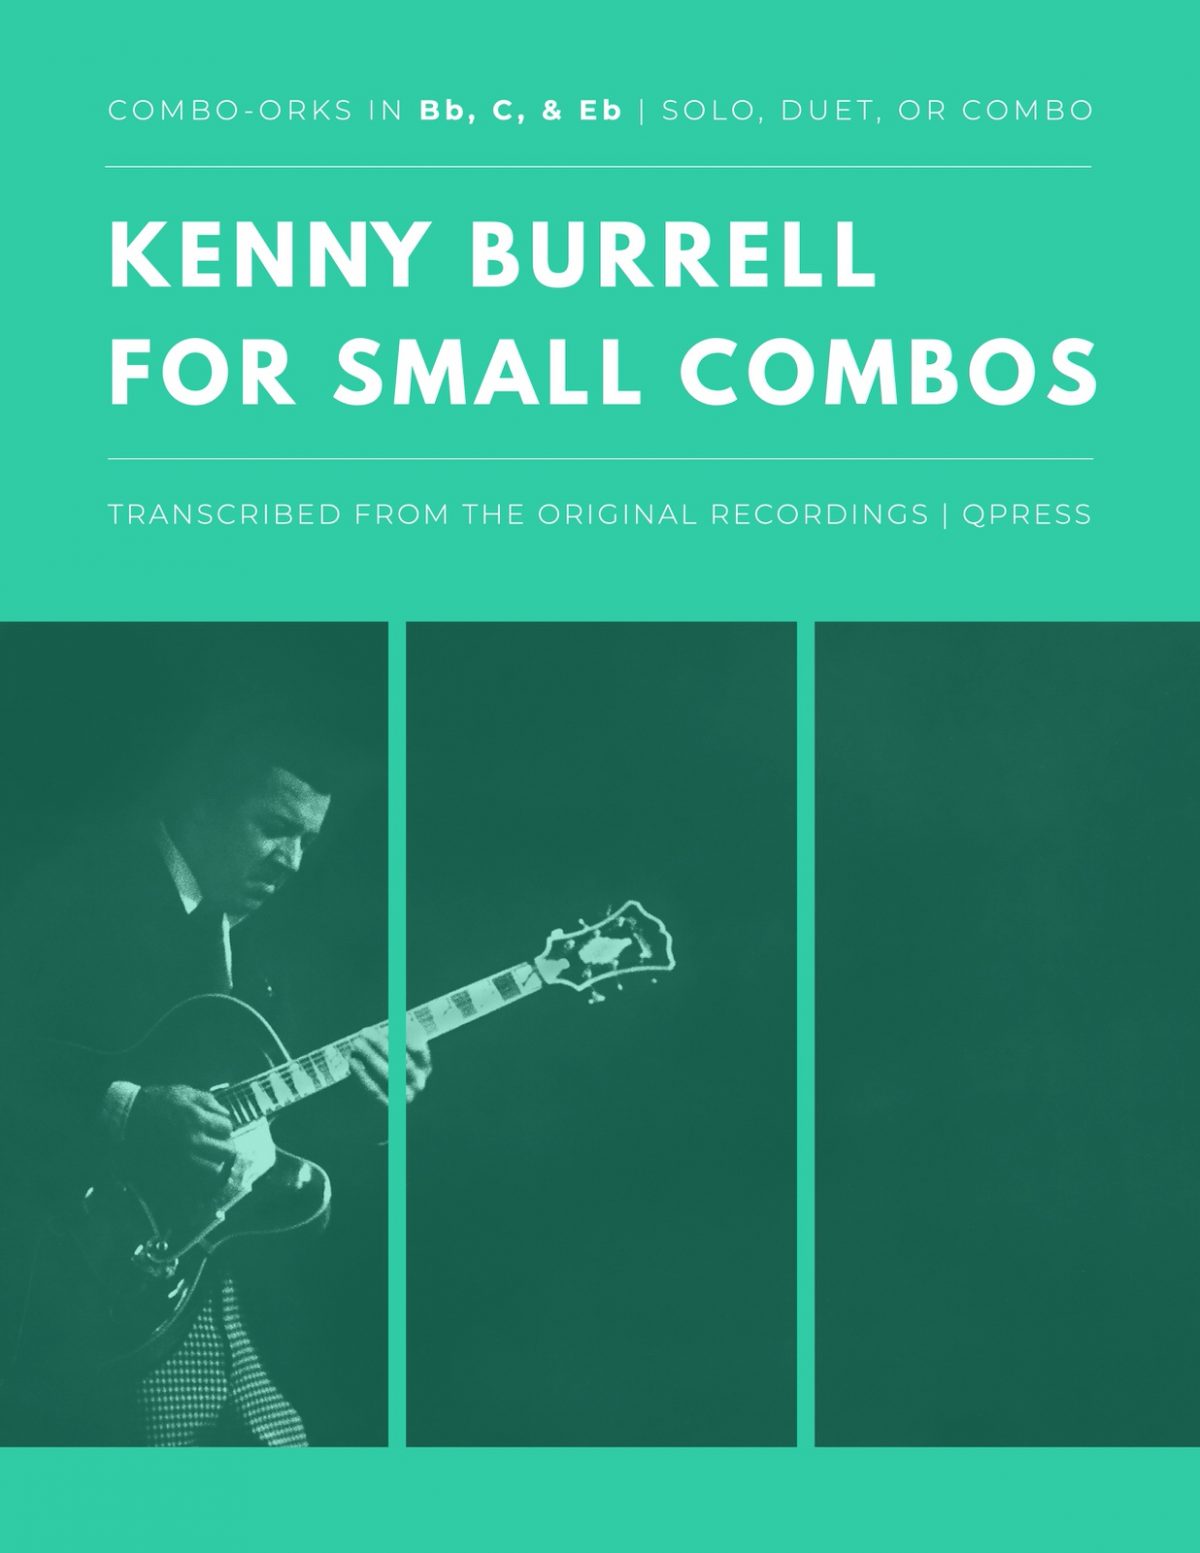 Kenny Burrell for Small Groups (Combo-Orks)